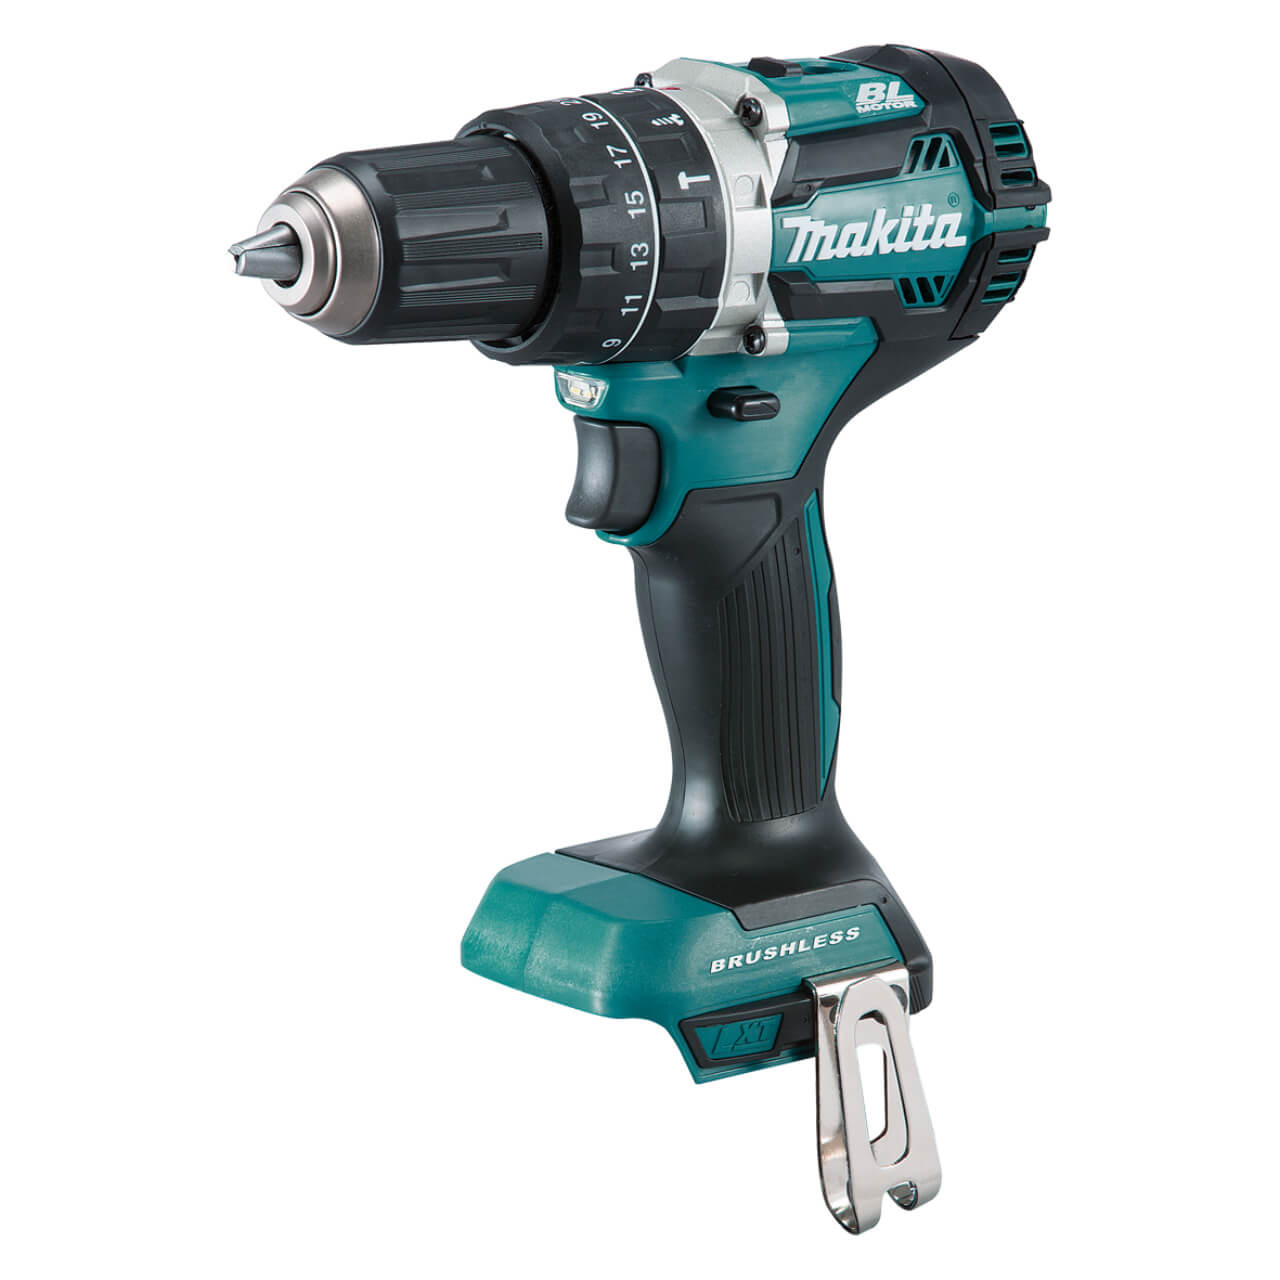 Makita 18V COMPACT BRUSHLESS Heavy Duty Hammer Driver Drill Kit - Includes 2 x 3.0Ah Batteries. Rapid Charger & Carry Case